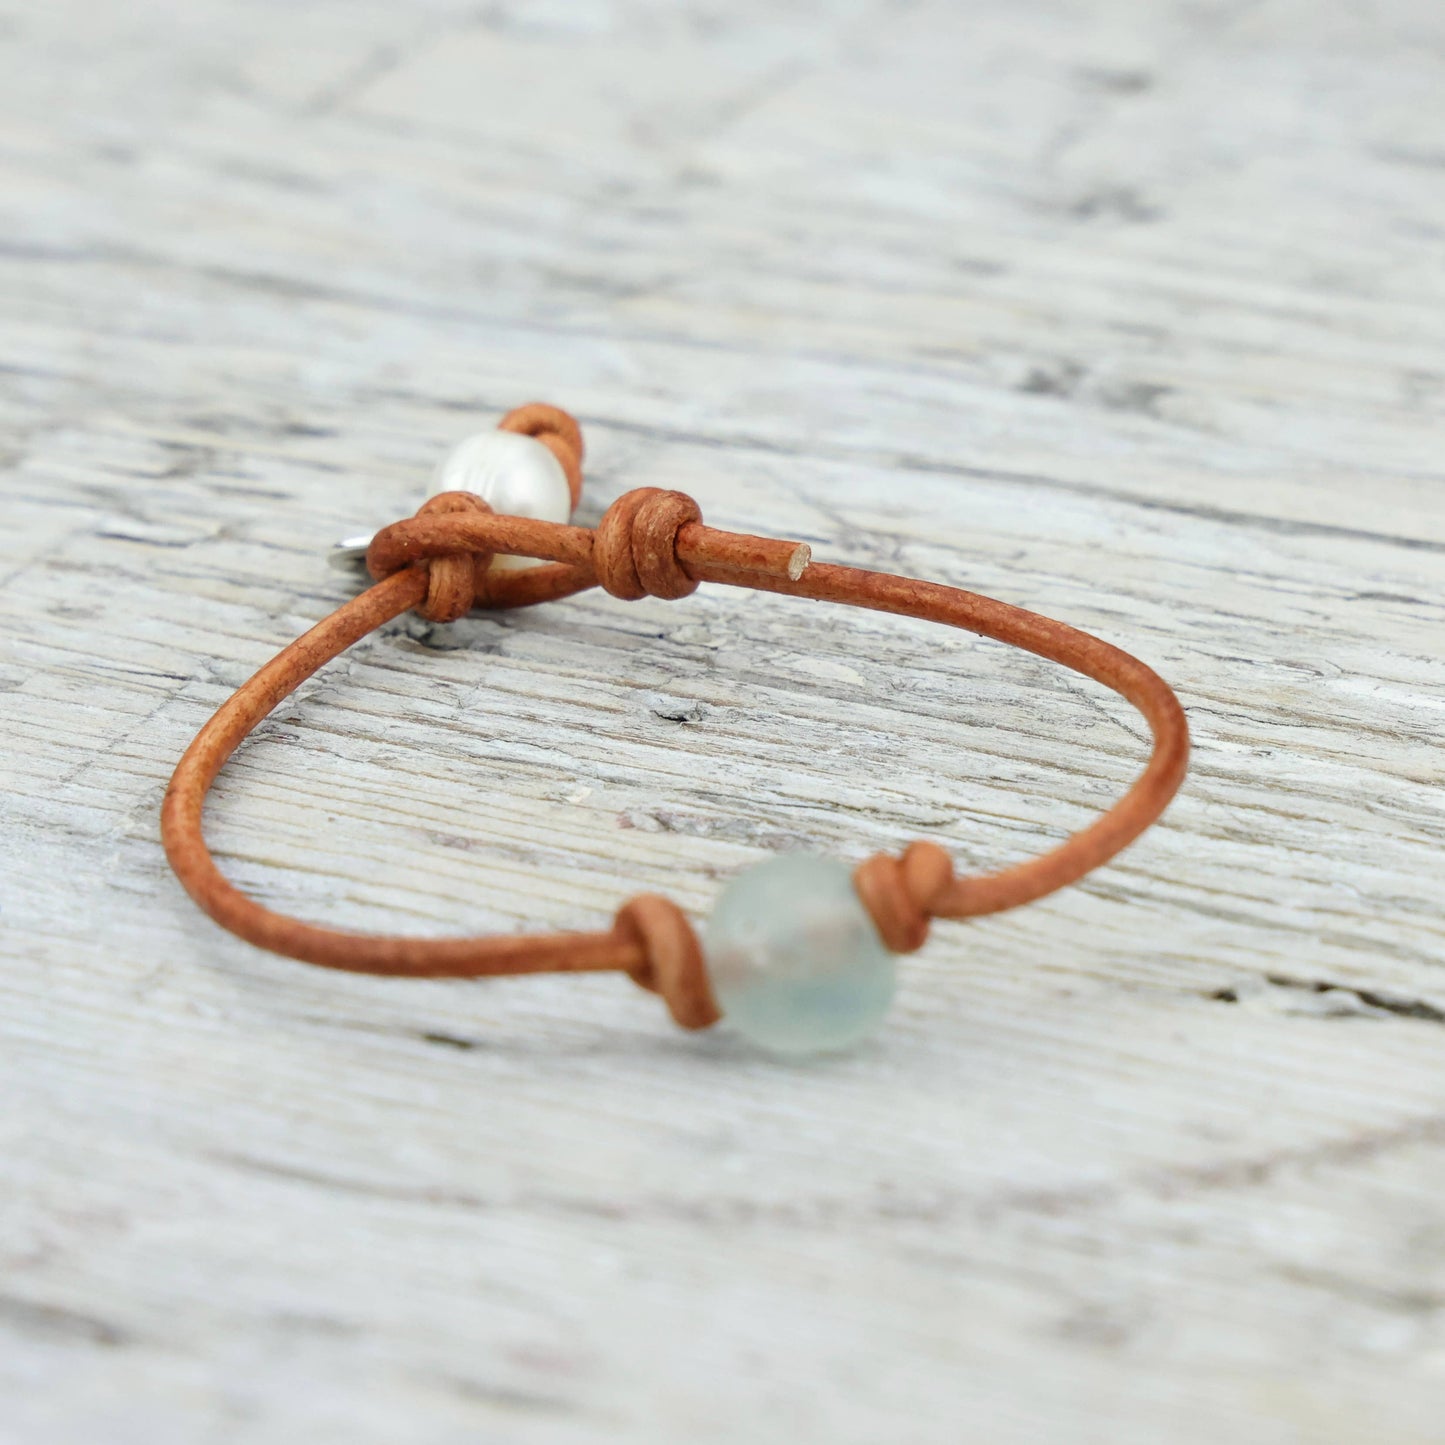 Recycled Sea Glass Leather Bracelet: 6.5" / Assortment